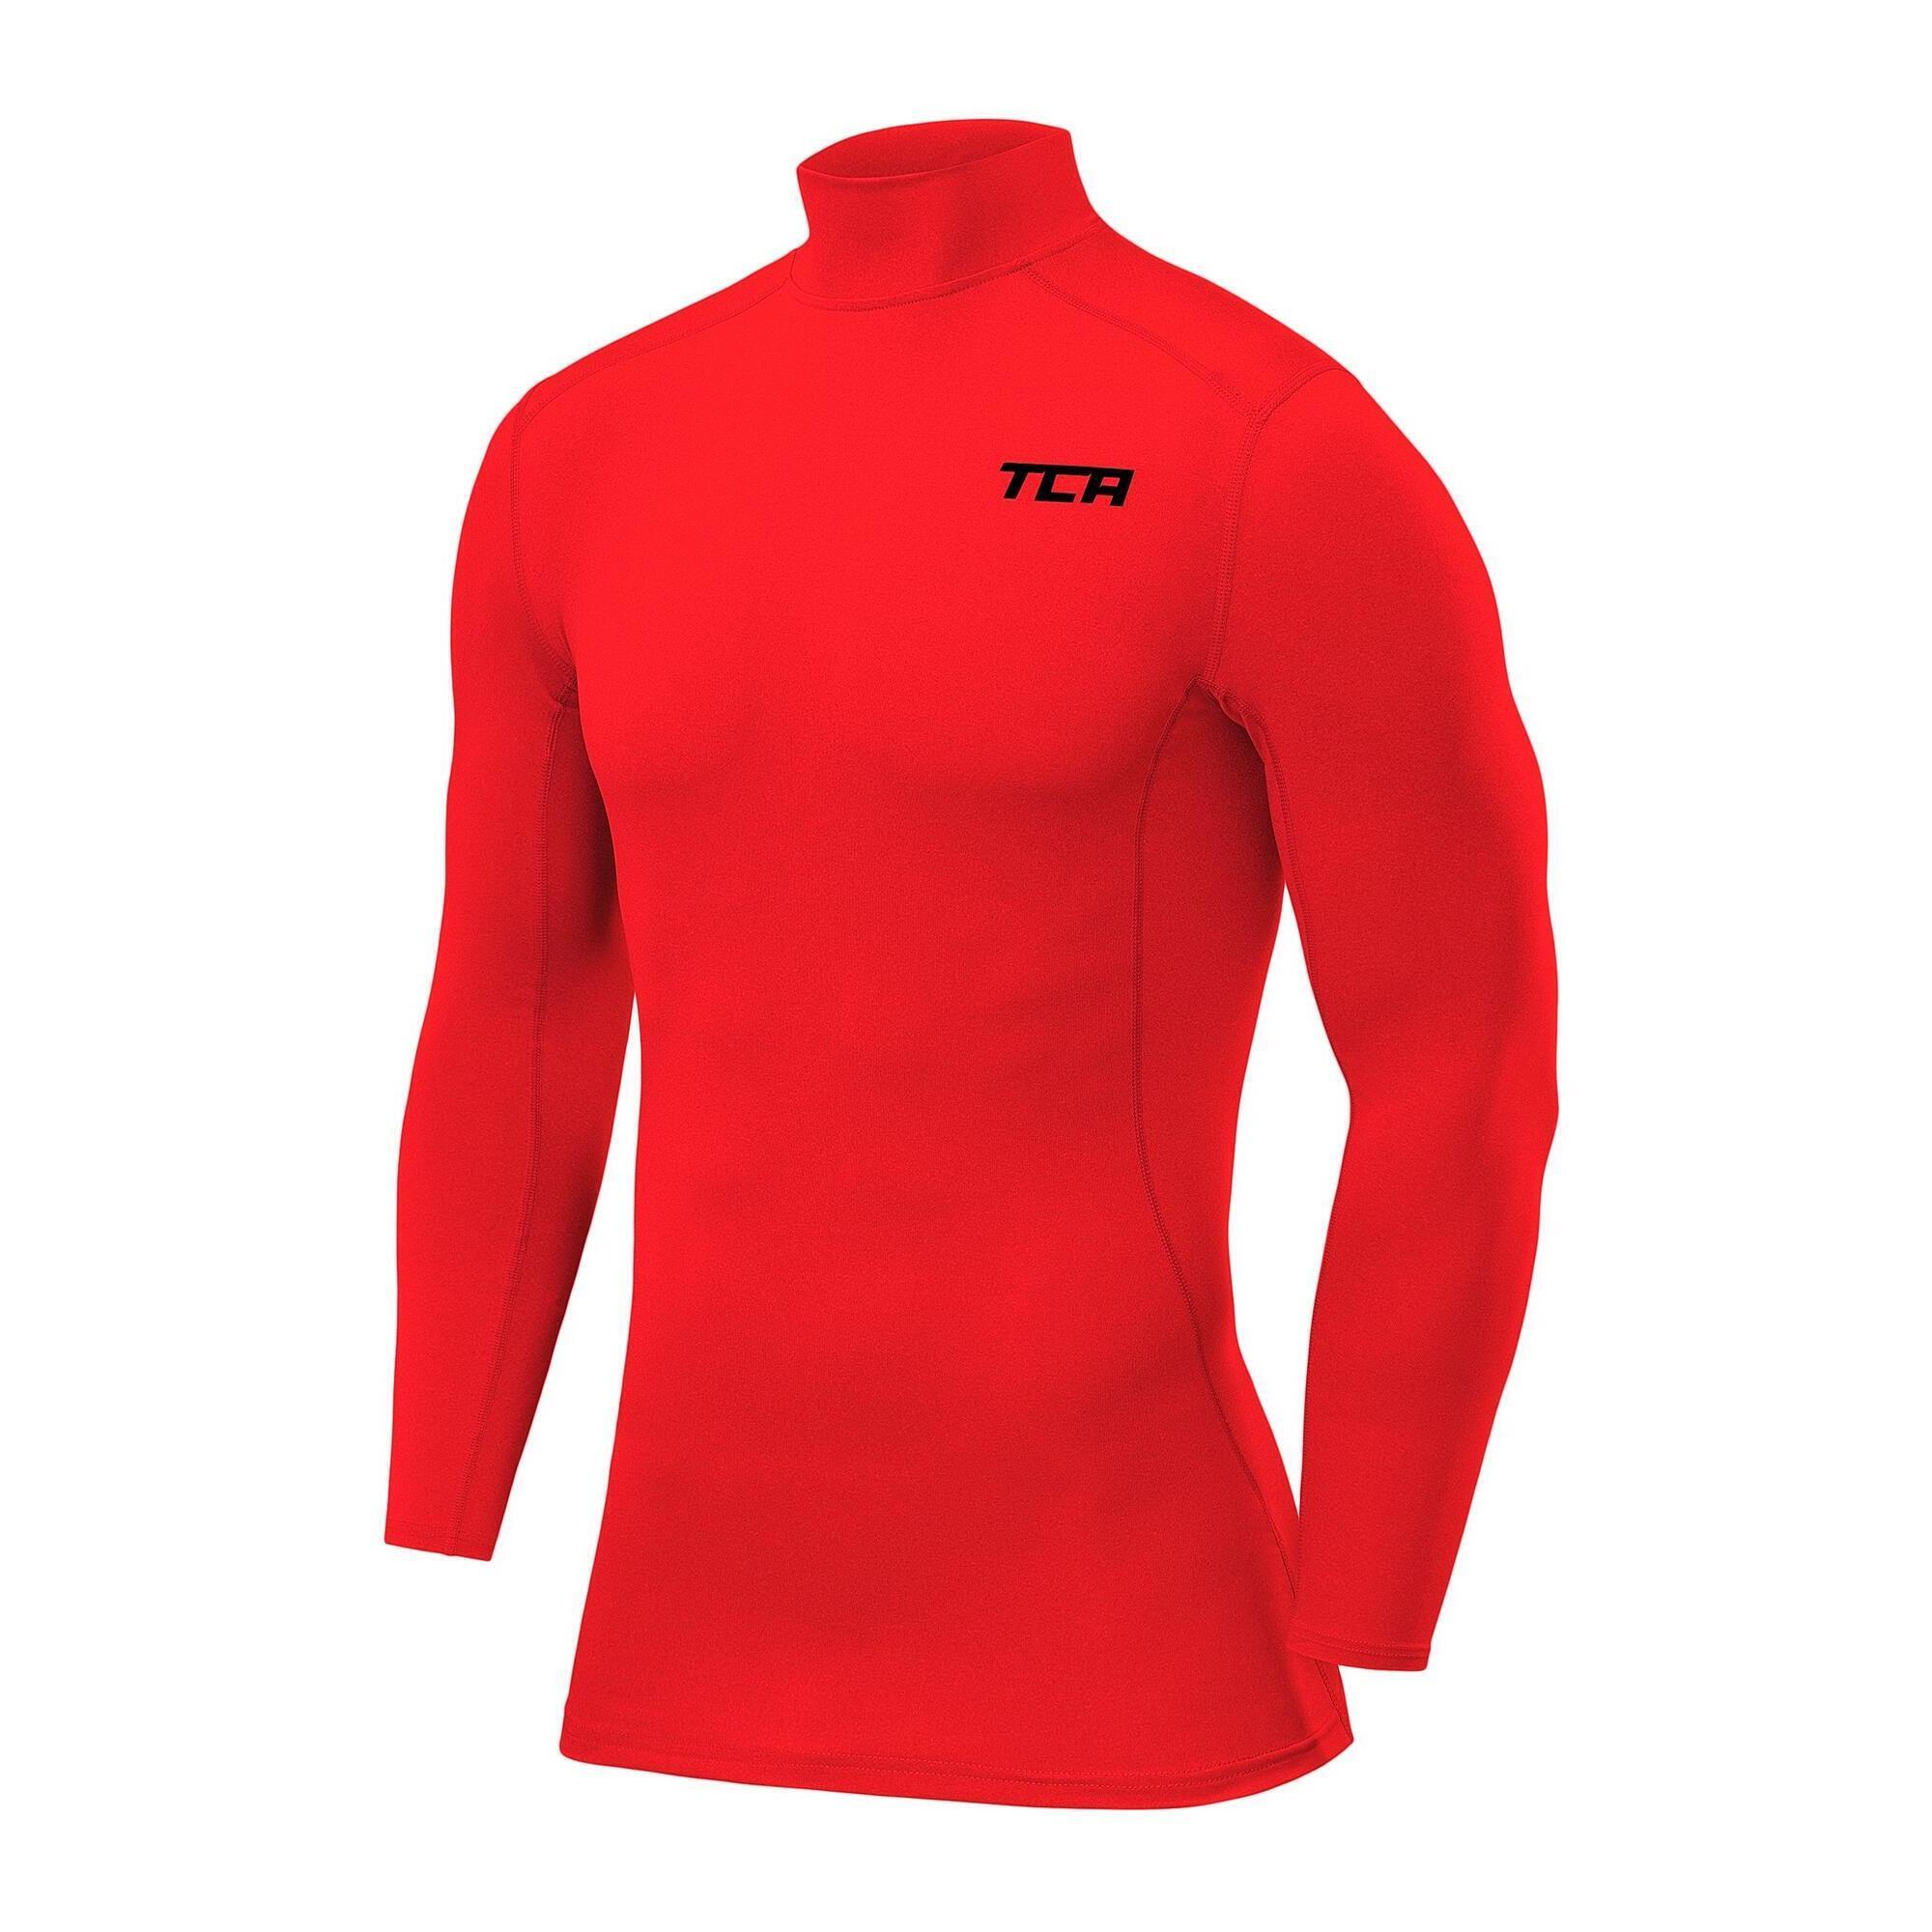 TCA Boys' Performance Base Layer Compression Top - Mock - High Risk Red